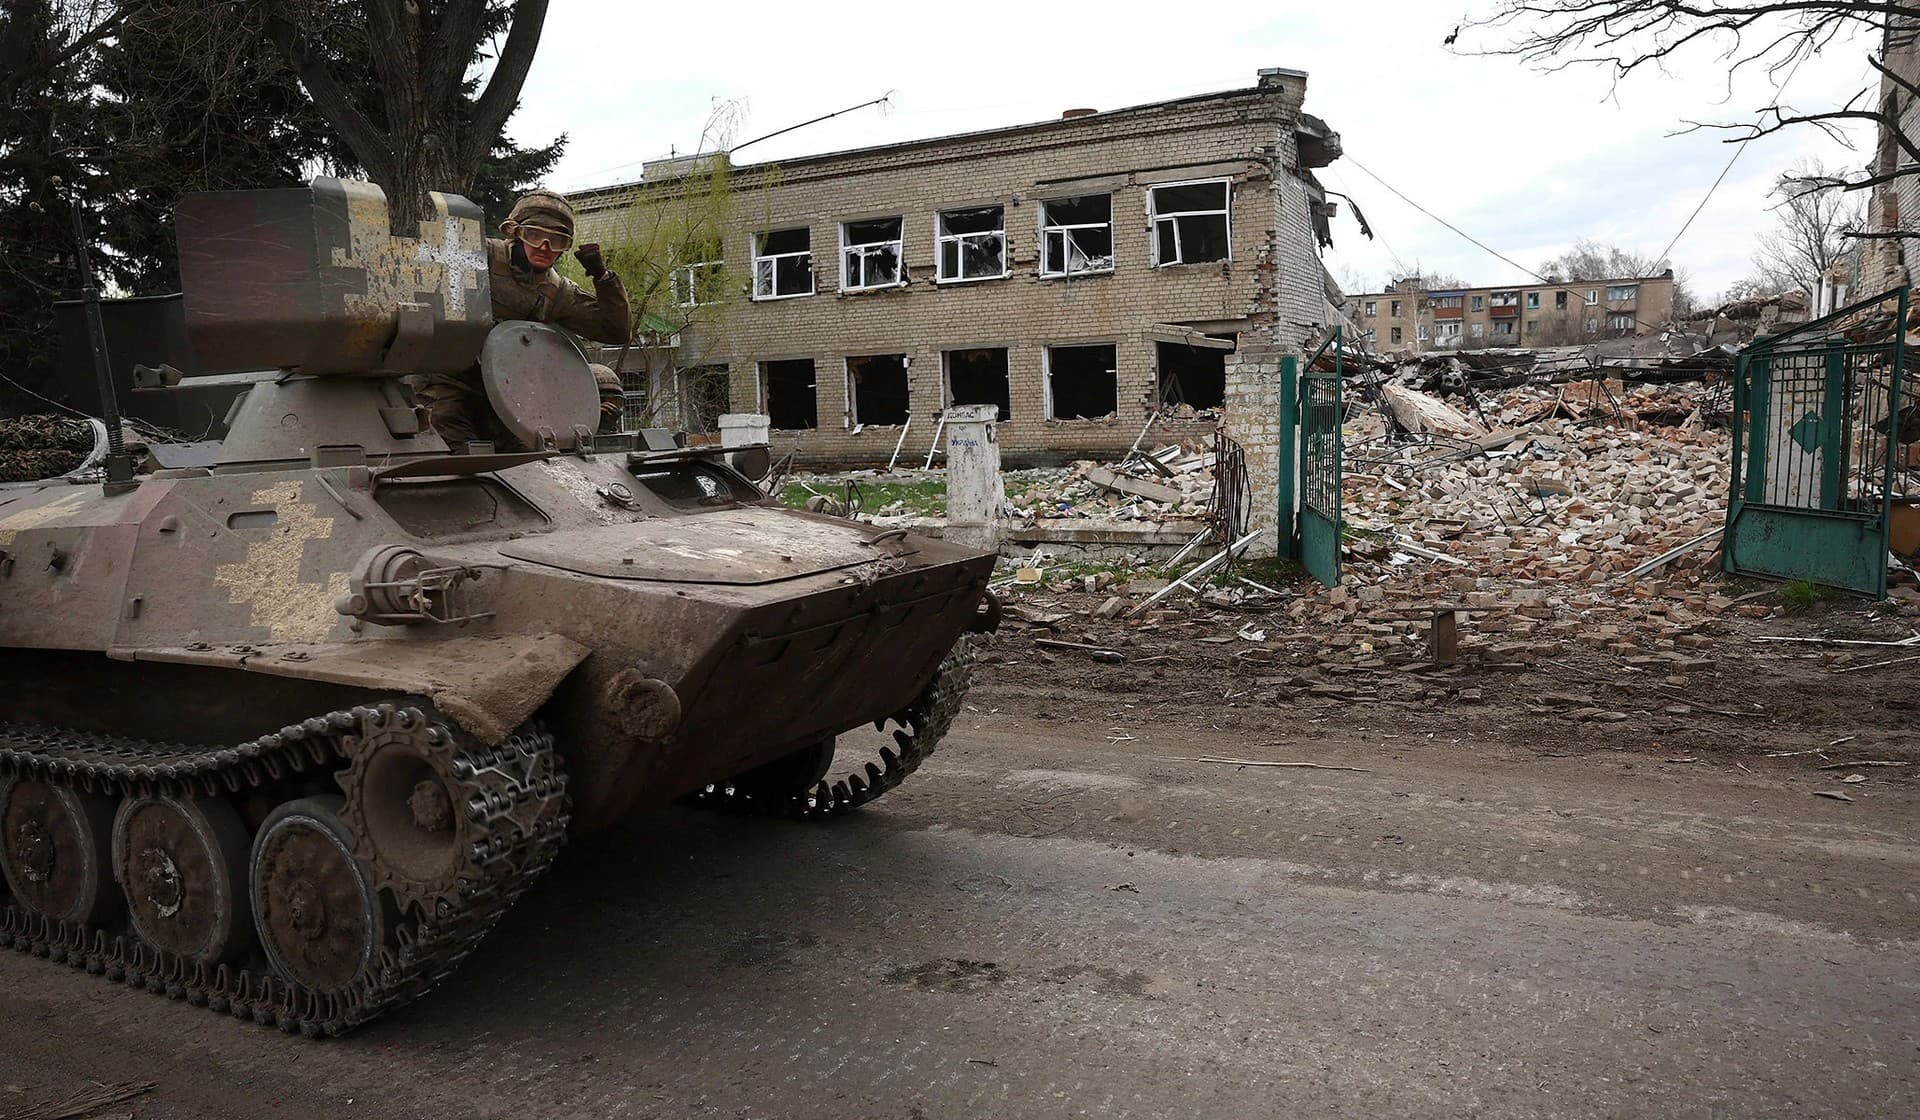 Ukrainian servicemen ride pass the destroyed school building on the way to the frontline near Chasiv Yar